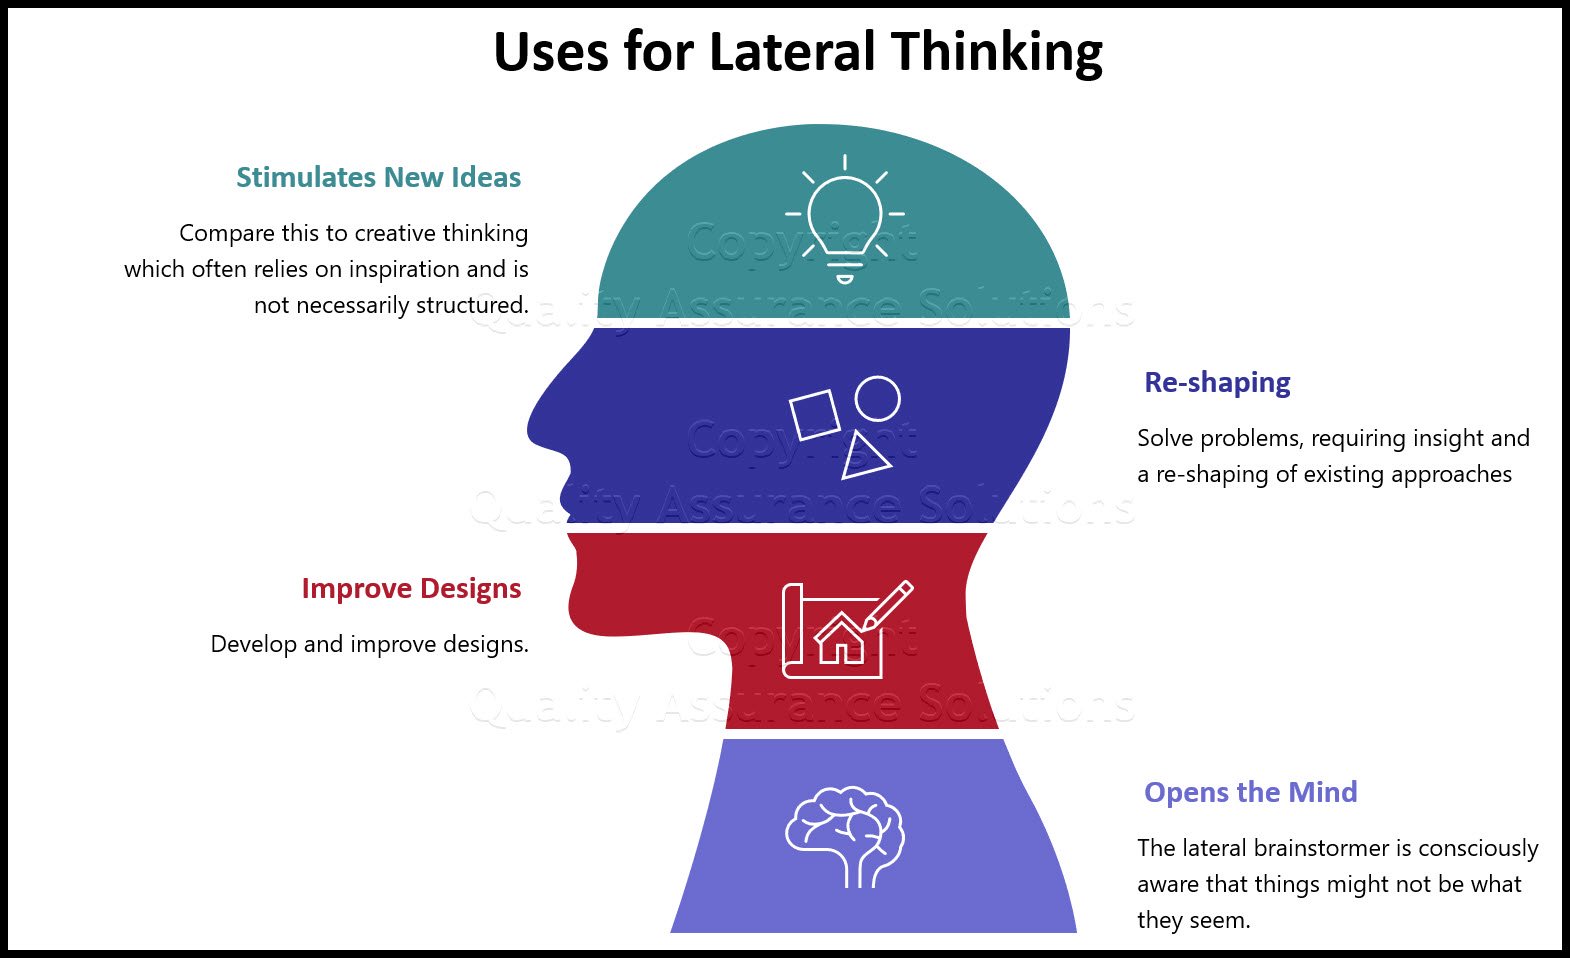 Lateral thinking is closely connected to creative thinking. It generates a wealth of ideas by removing the barriers from following a particular path.